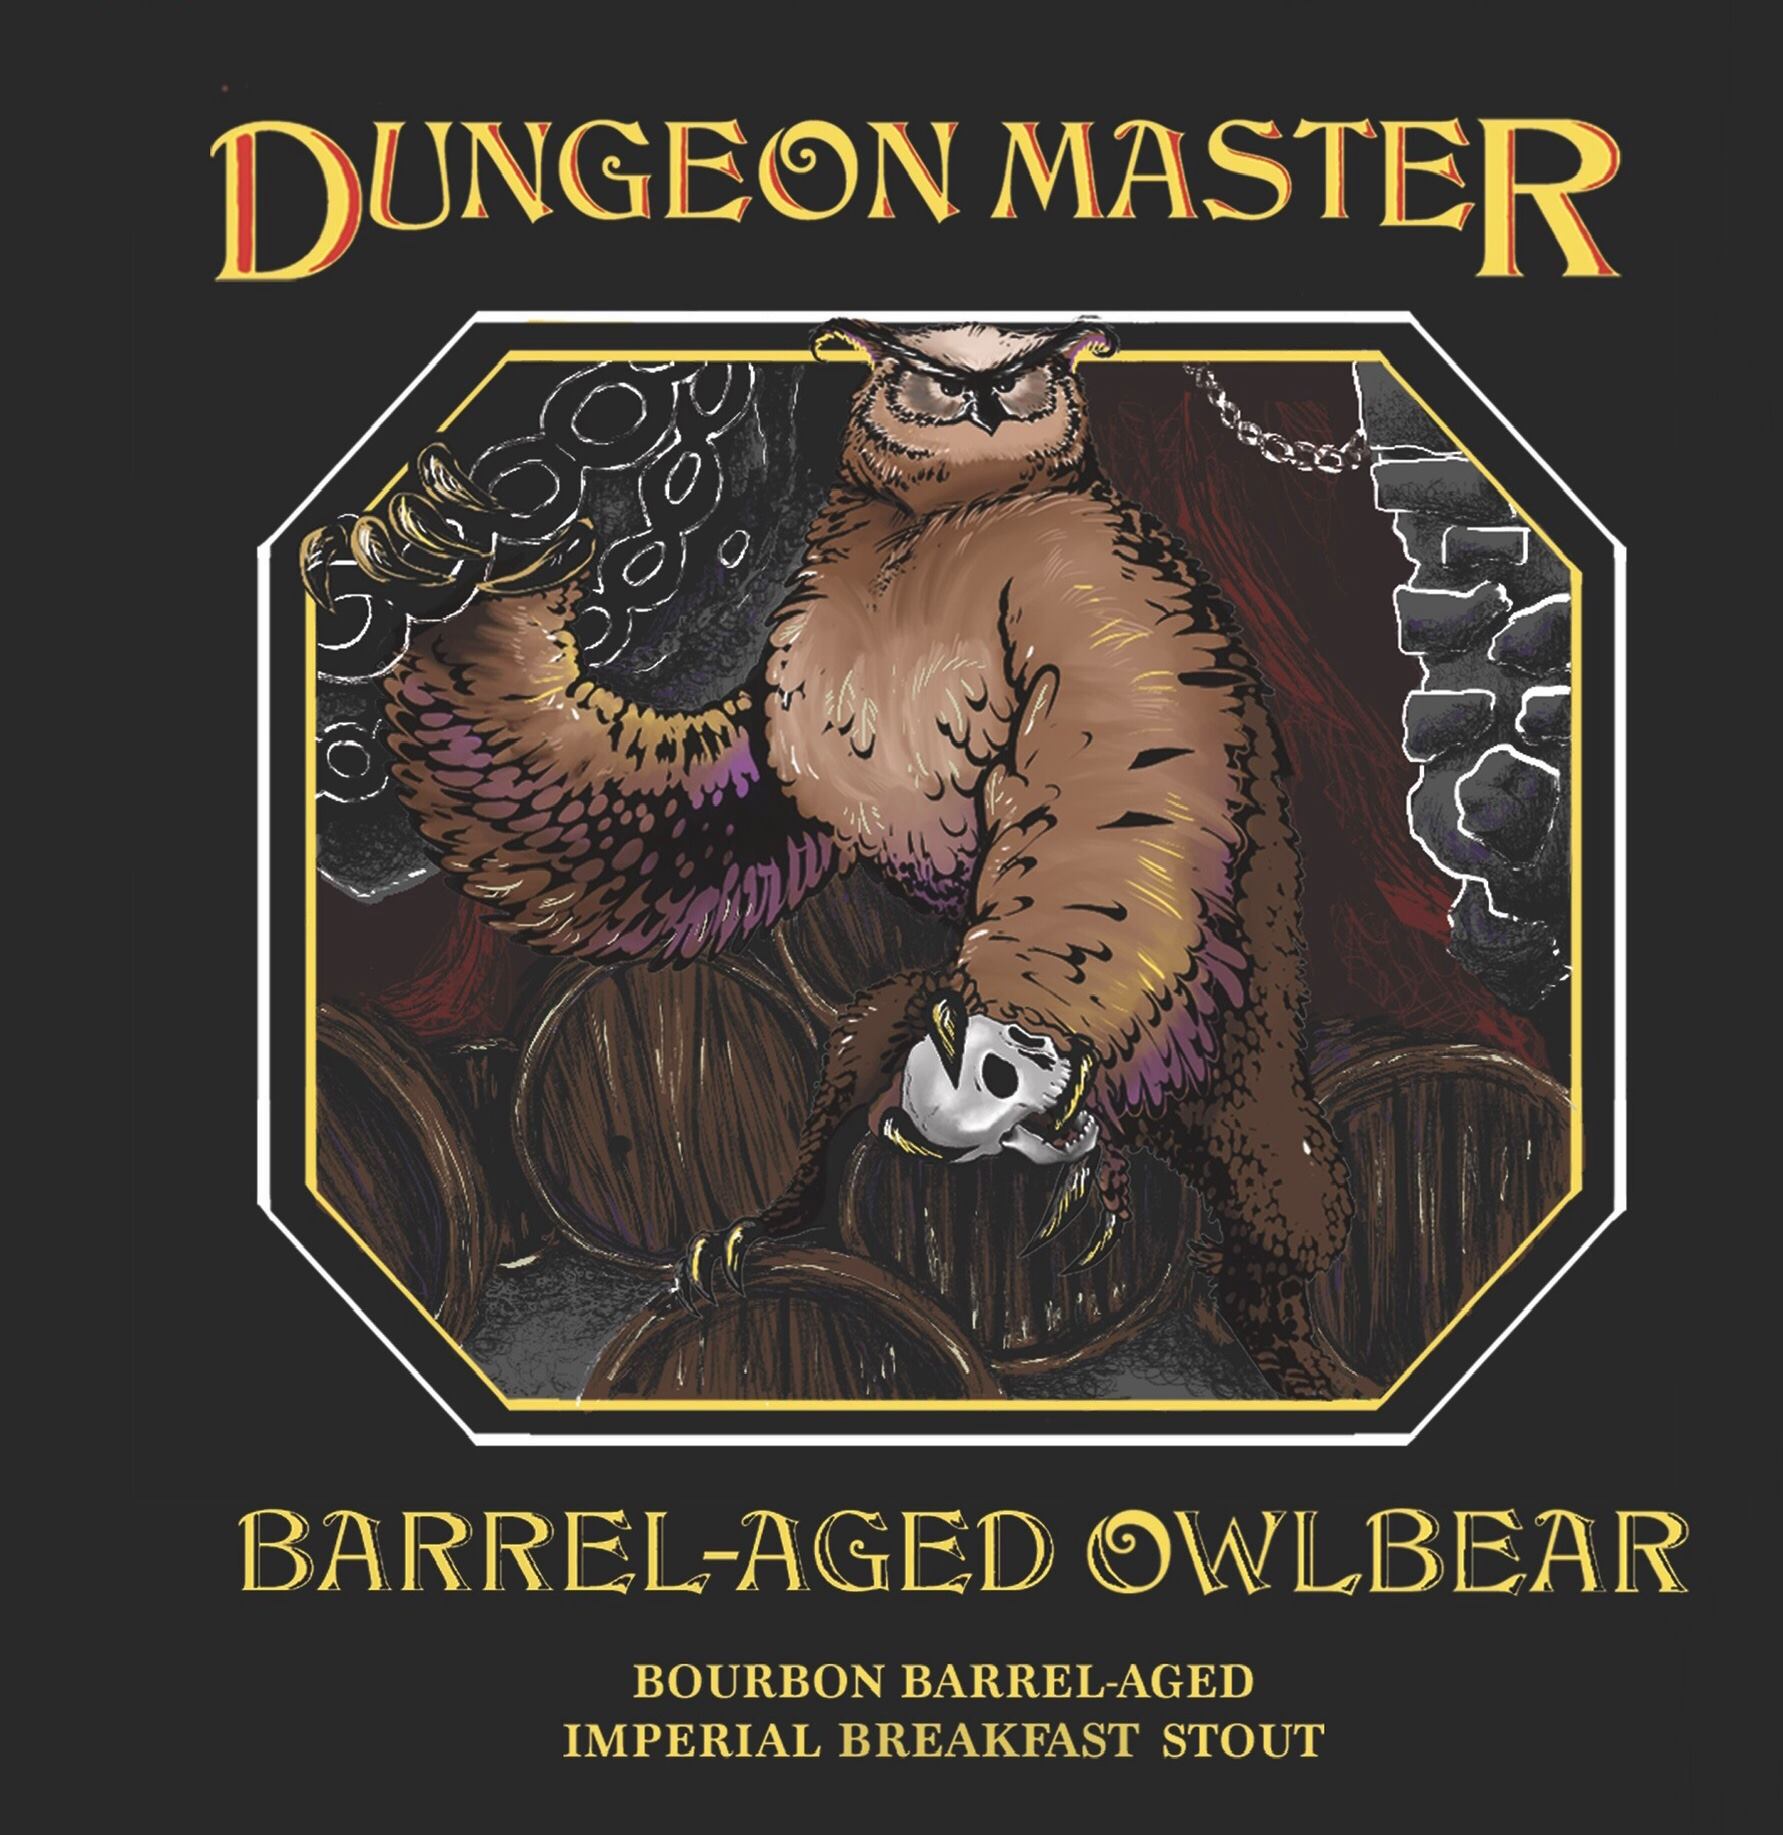 Logo for Barrel-Aged Owlbear, part of Miskatonic Brewing Company's Dungeon Master series